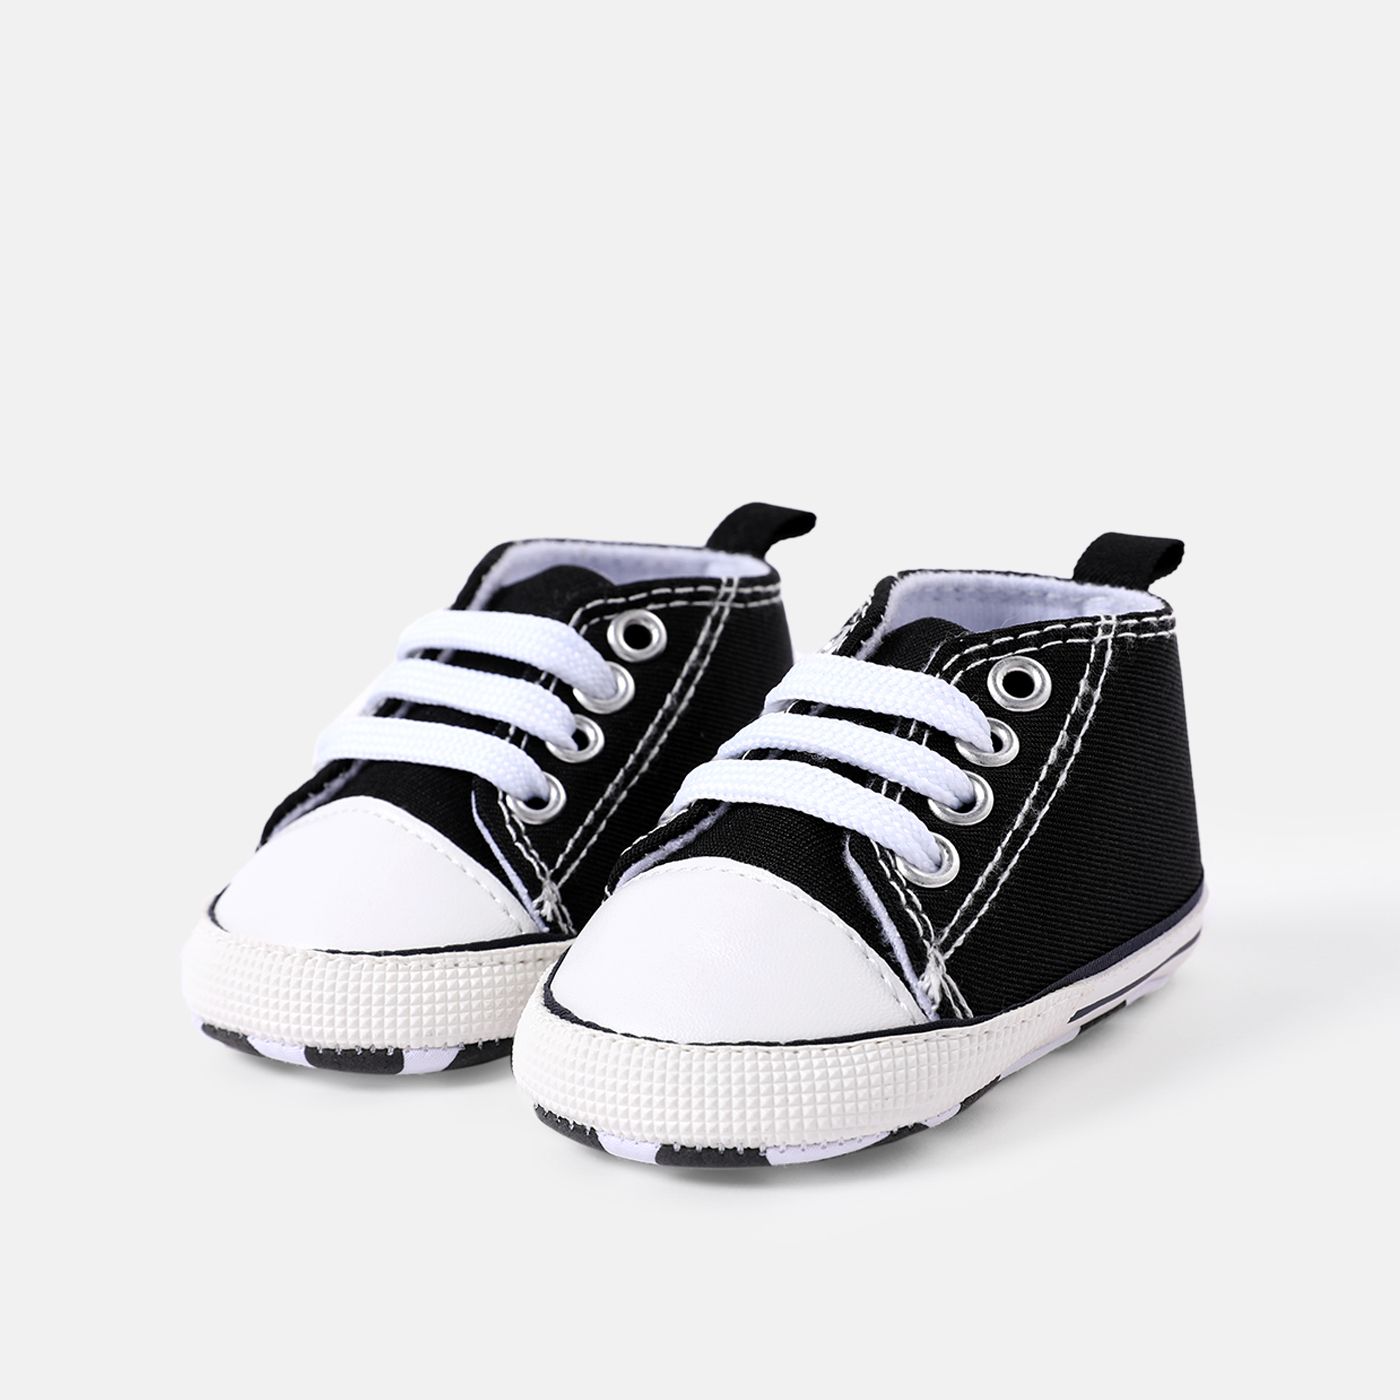 Baby / Toddler Lace Up Classic Prewalker Shoes